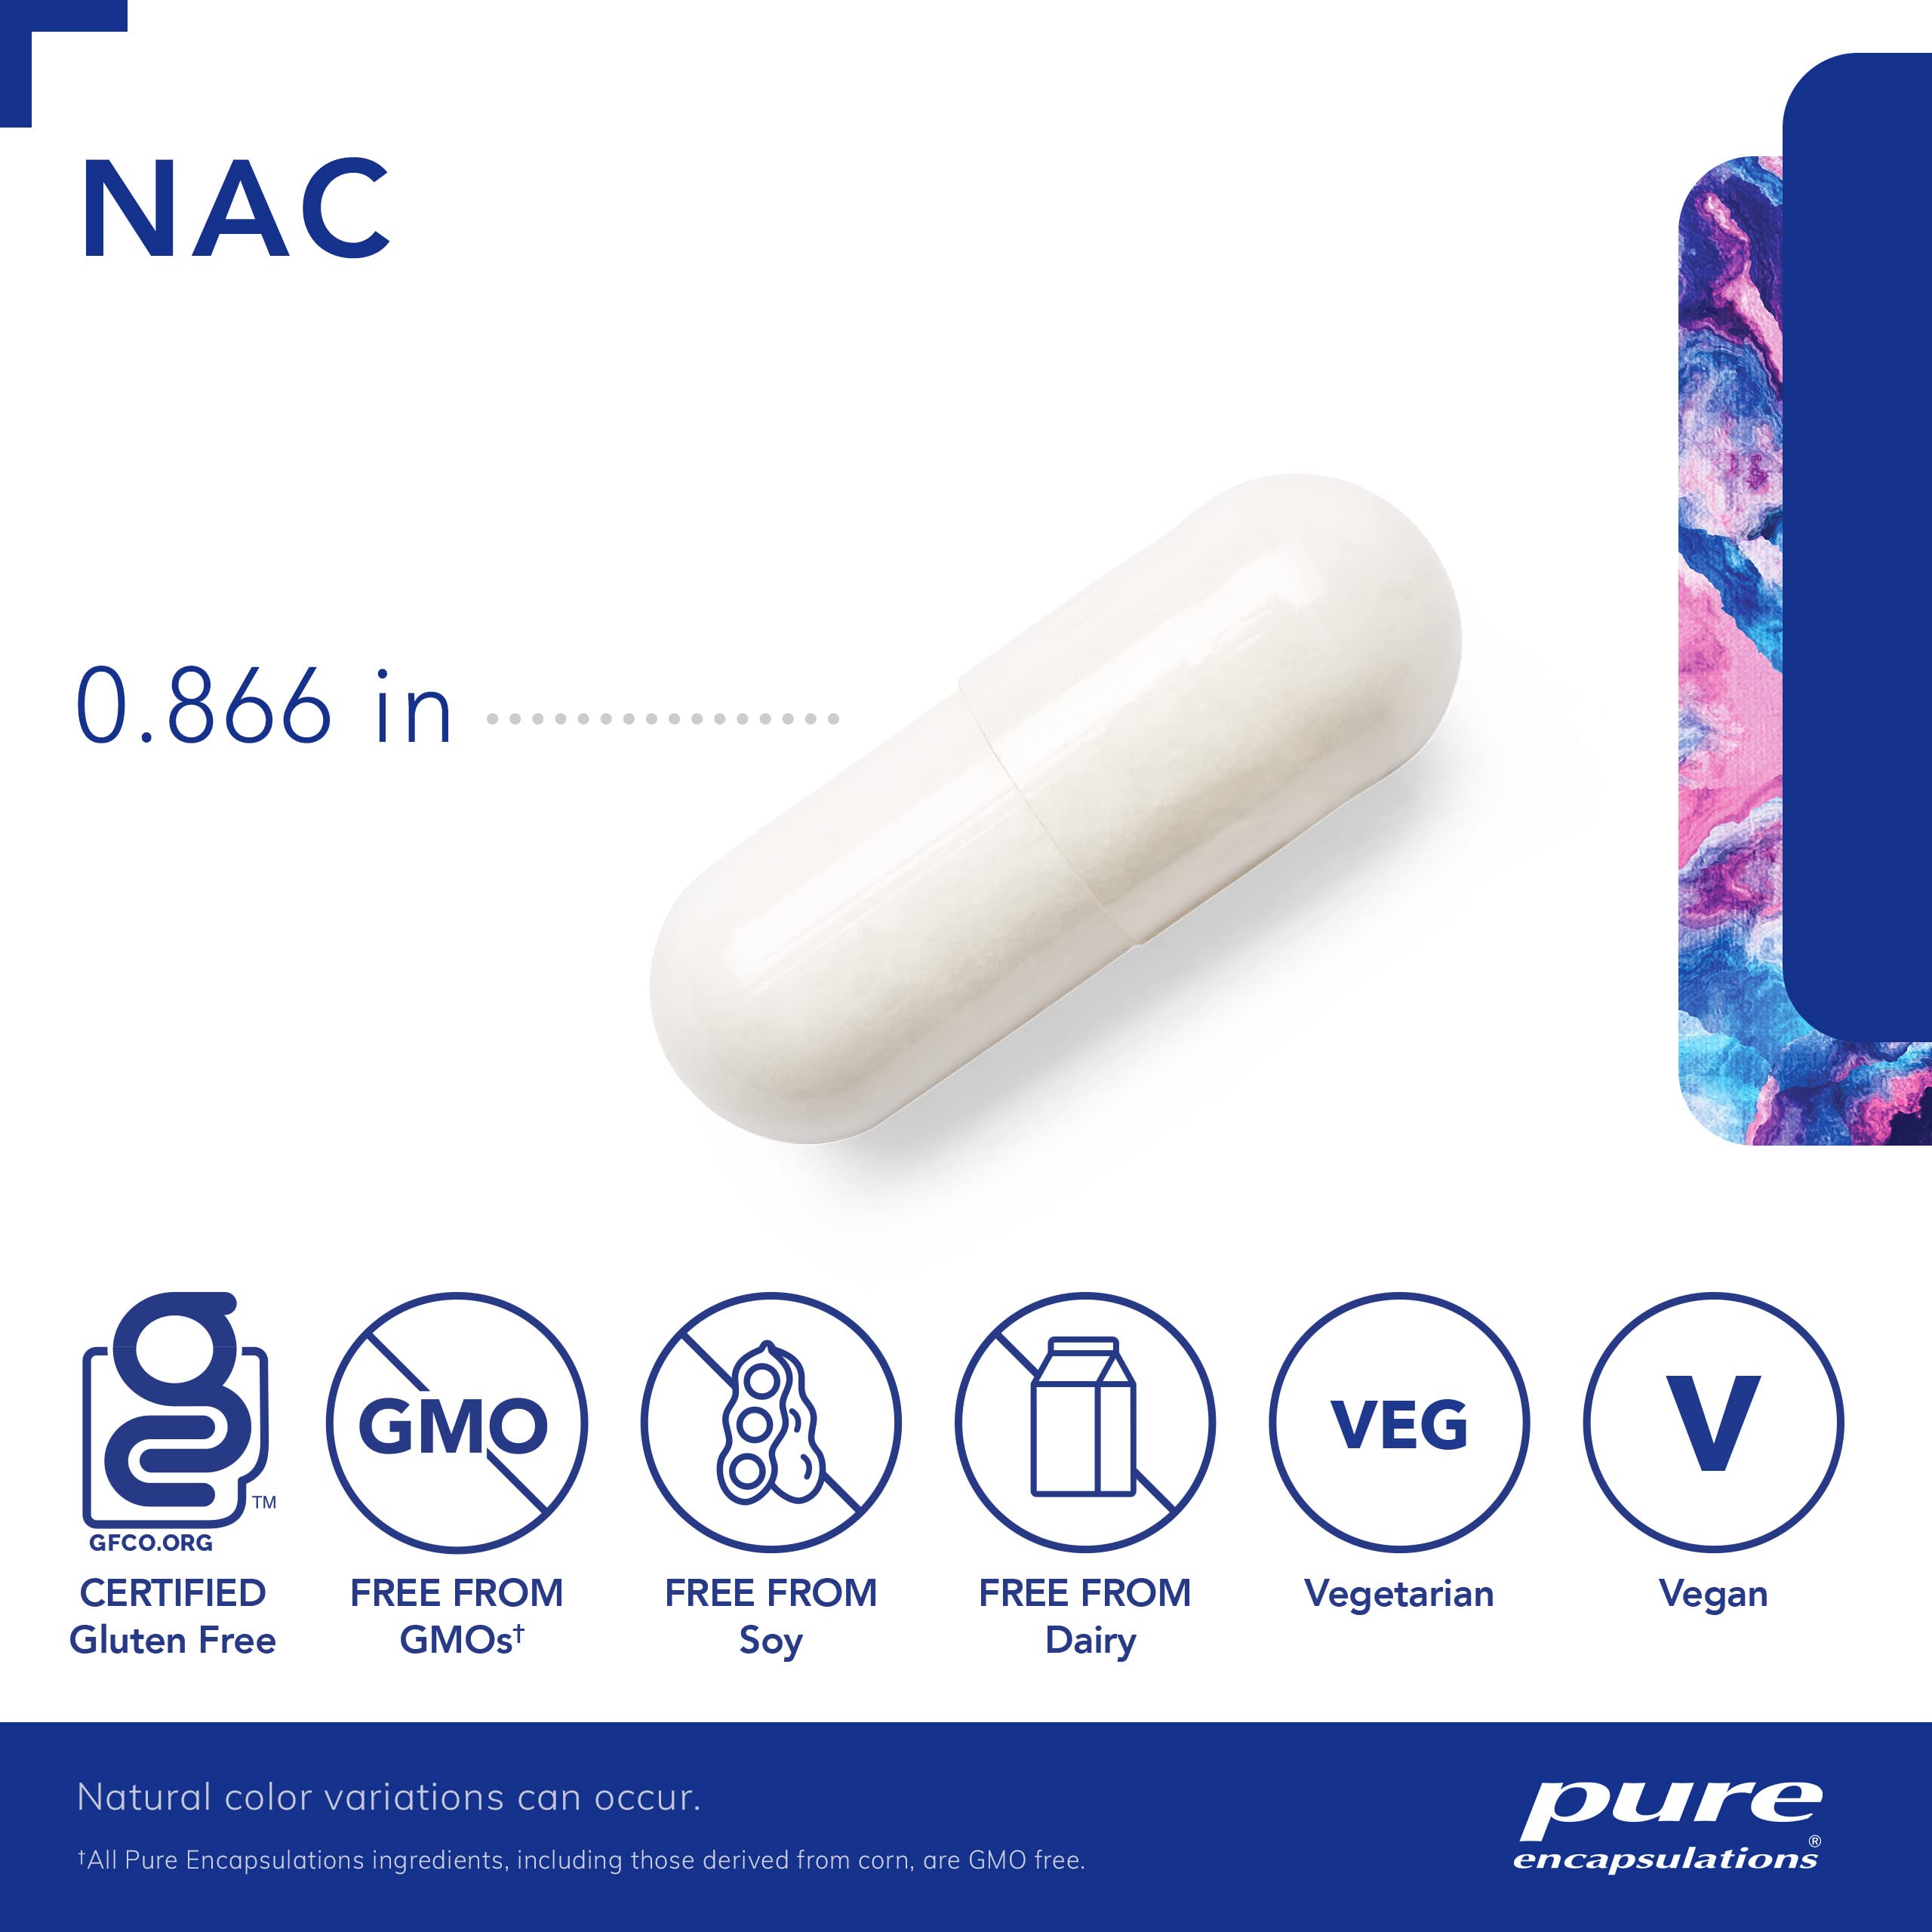 Pure Encapsulations NAC 600 mg - N-Acetyl Cysteine NAC Supplement for Lung Health & Immune Support, Liver Support & Antioxidants* - with Freeform N-Acetyl-L-Cysteine - 90 Capsules